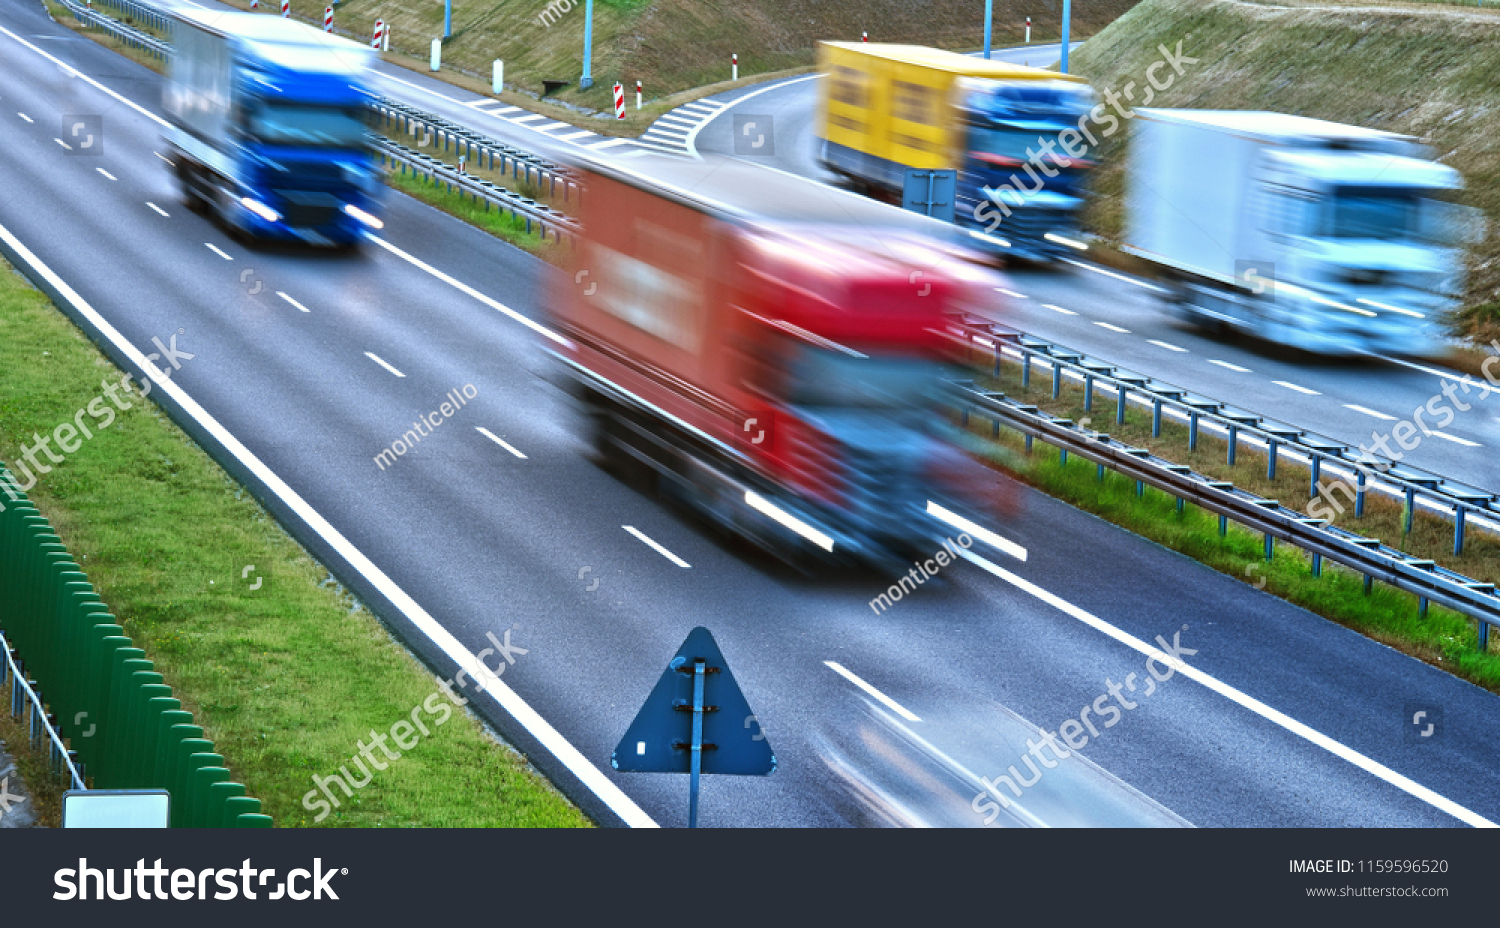 Trucks on four lane controlled-access highway in Poland.
 #1159596520